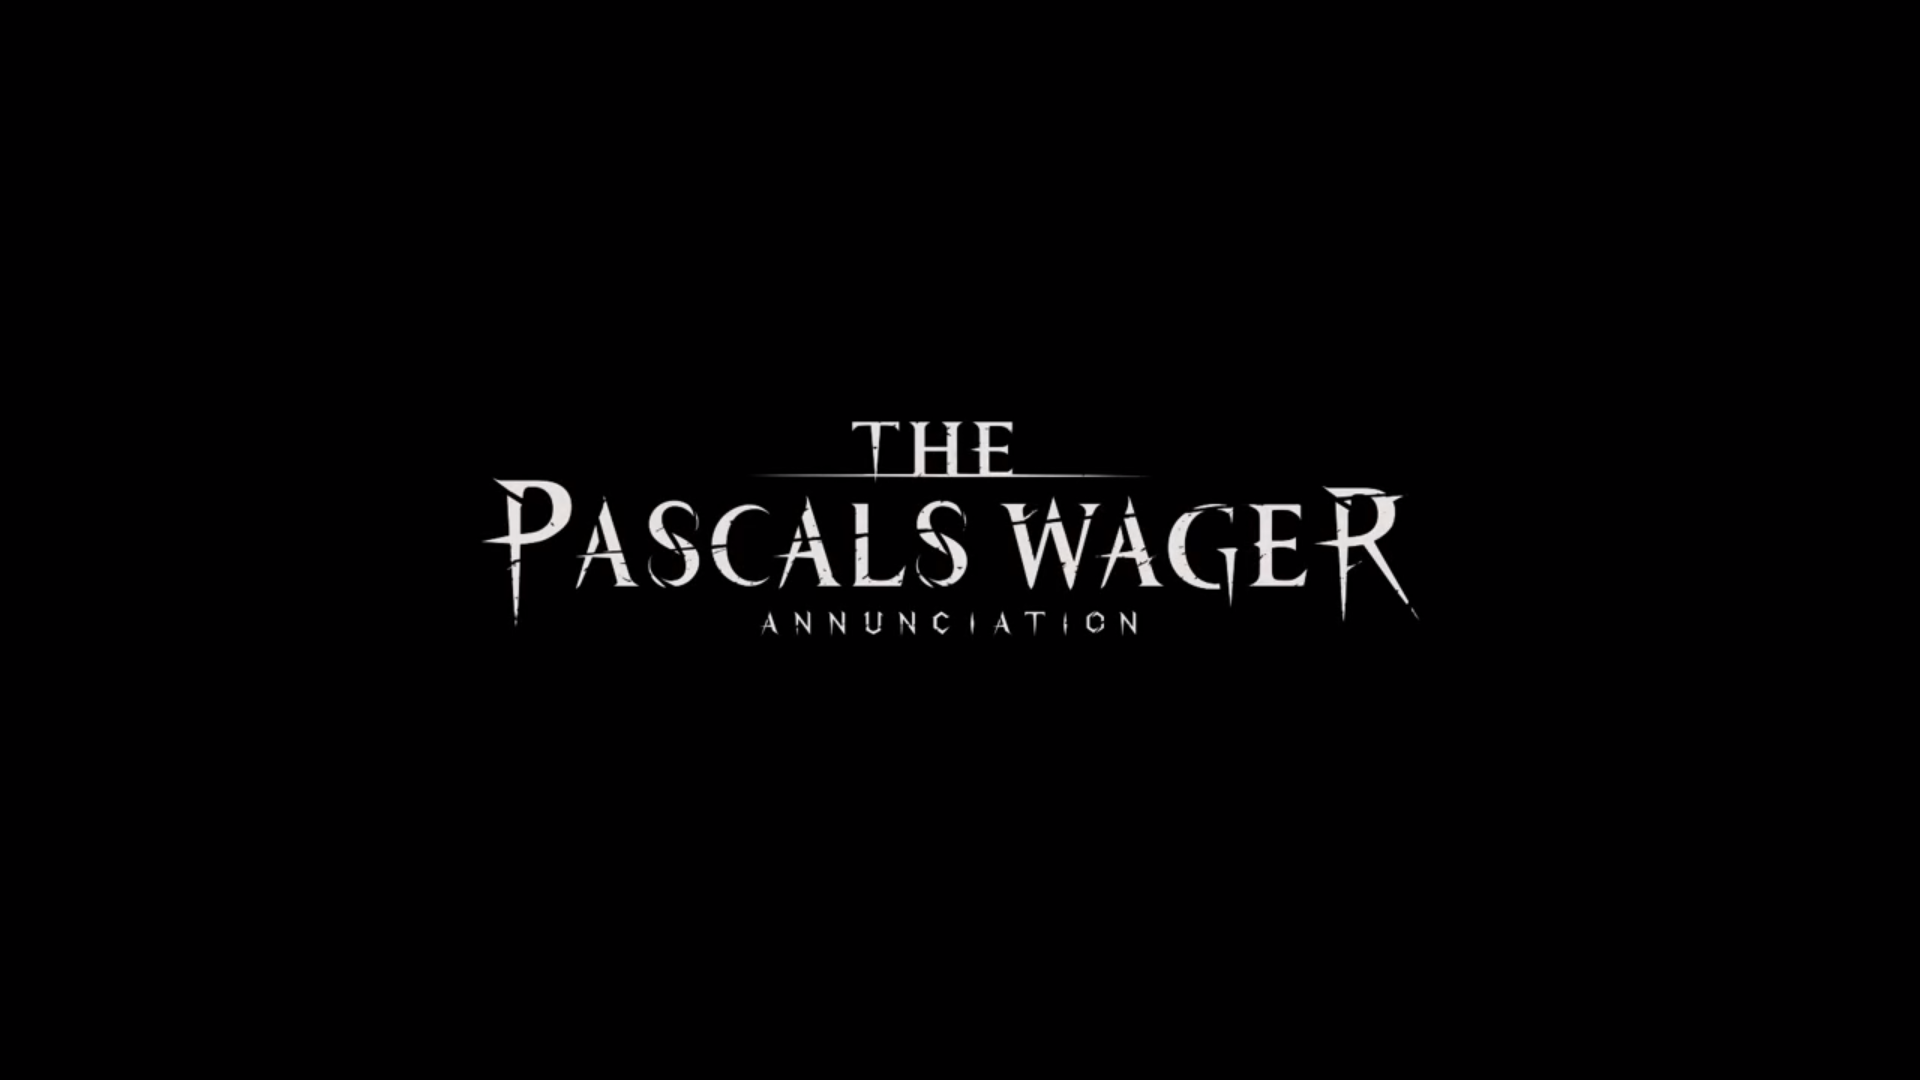 Pascal s wager кэш. Pascal's Wager. Pascal's Wager: Definitive Edition. Pascal’s Wager Терренс. The Pascal’s Wager: Annunciation.